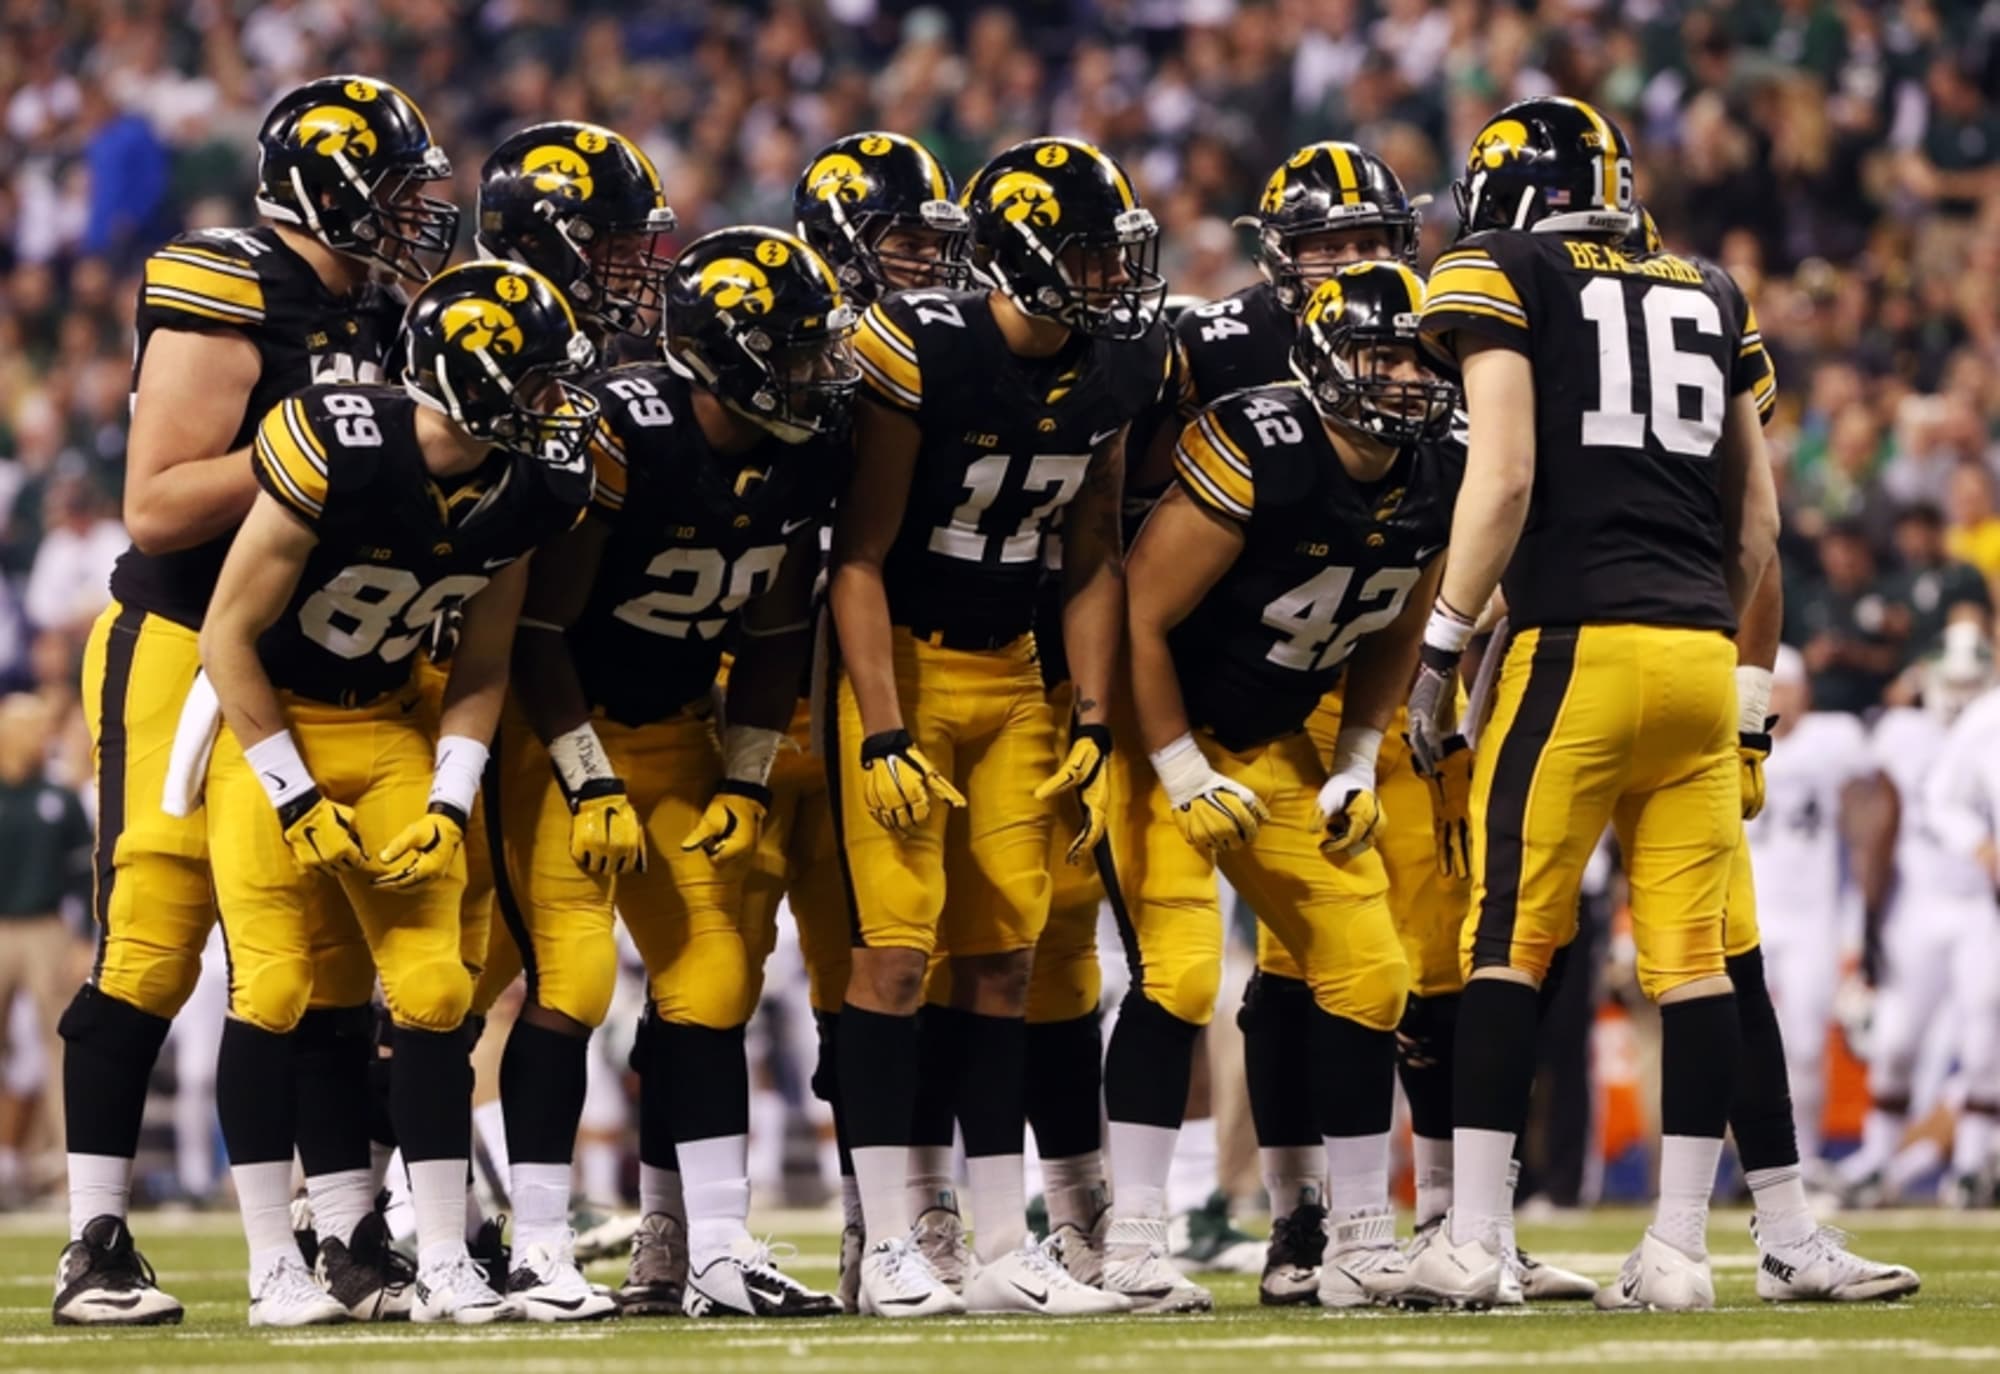 Why Iowa's Football Schedule Works in Their Favor